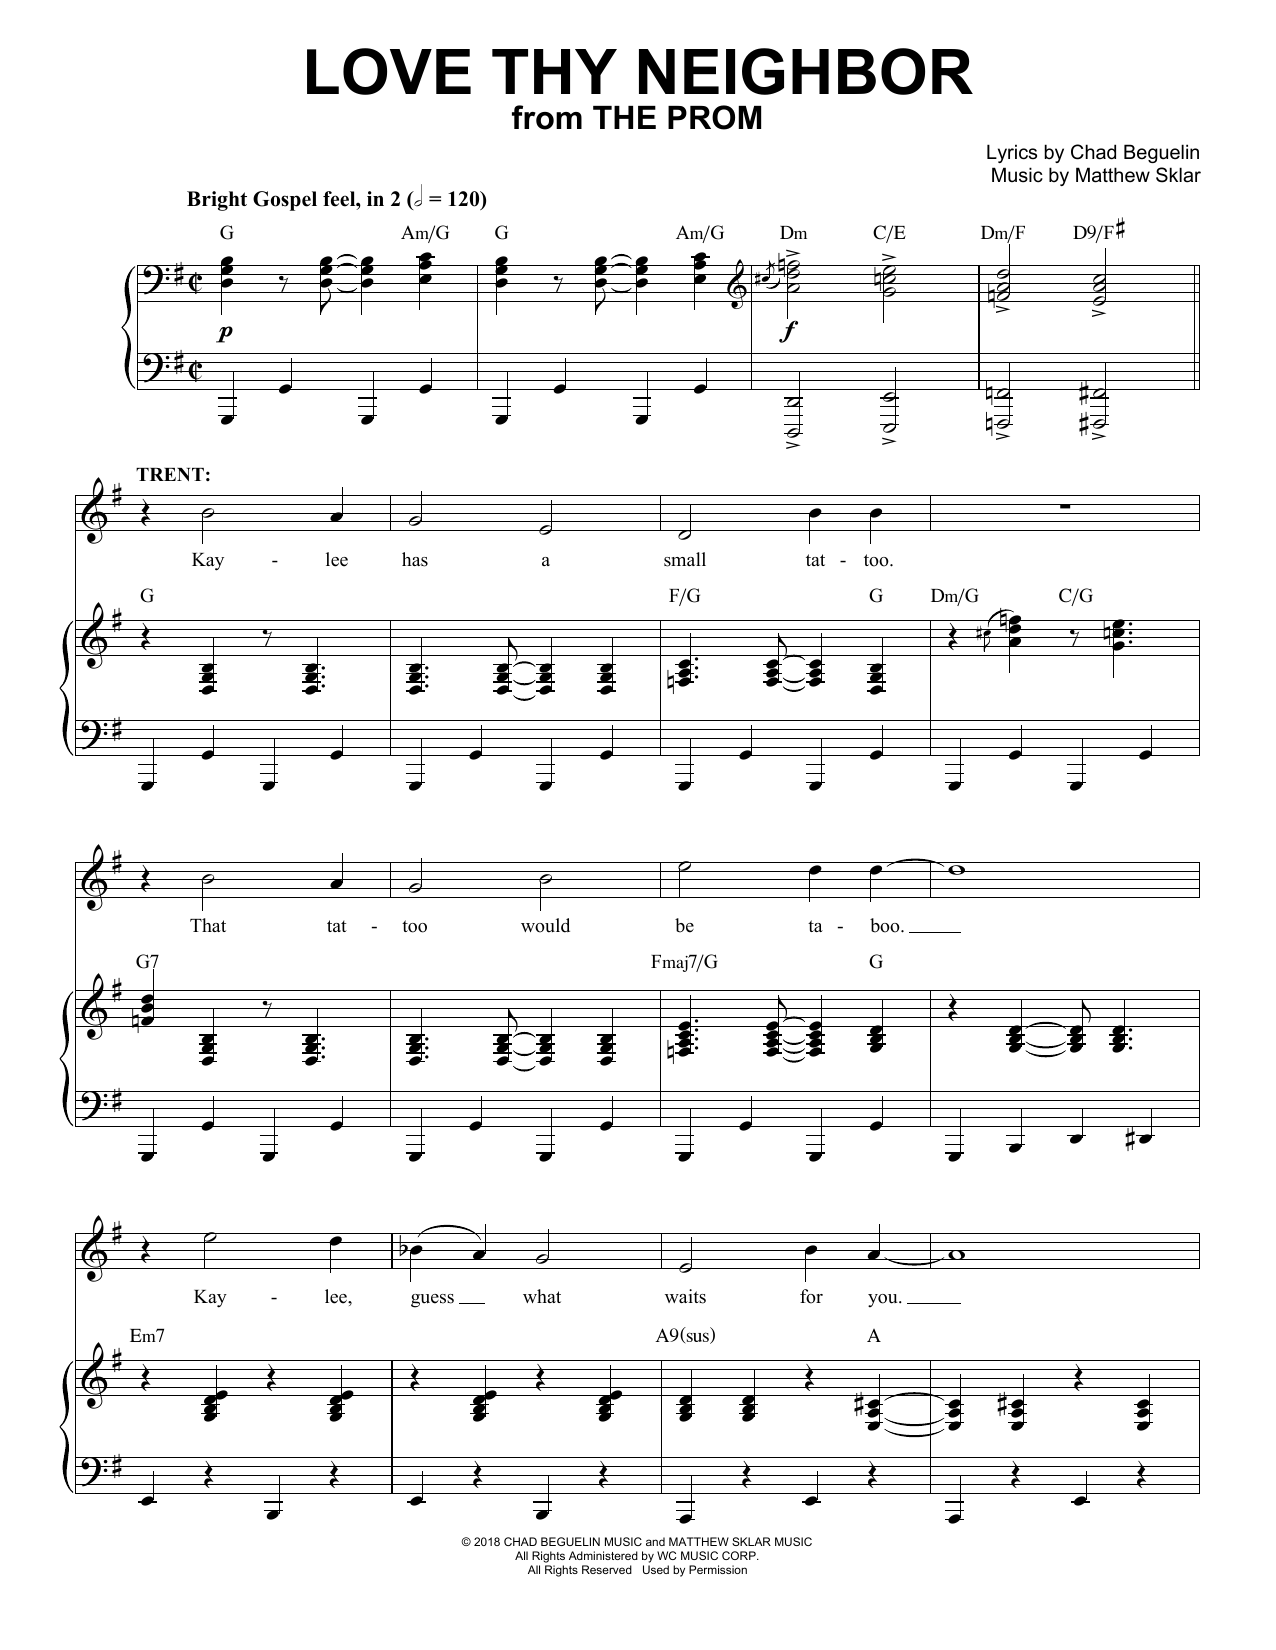 Download Matthew Sklar & Chad Beguelin Love Thy Neighbor (from The Prom: A New Sheet Music